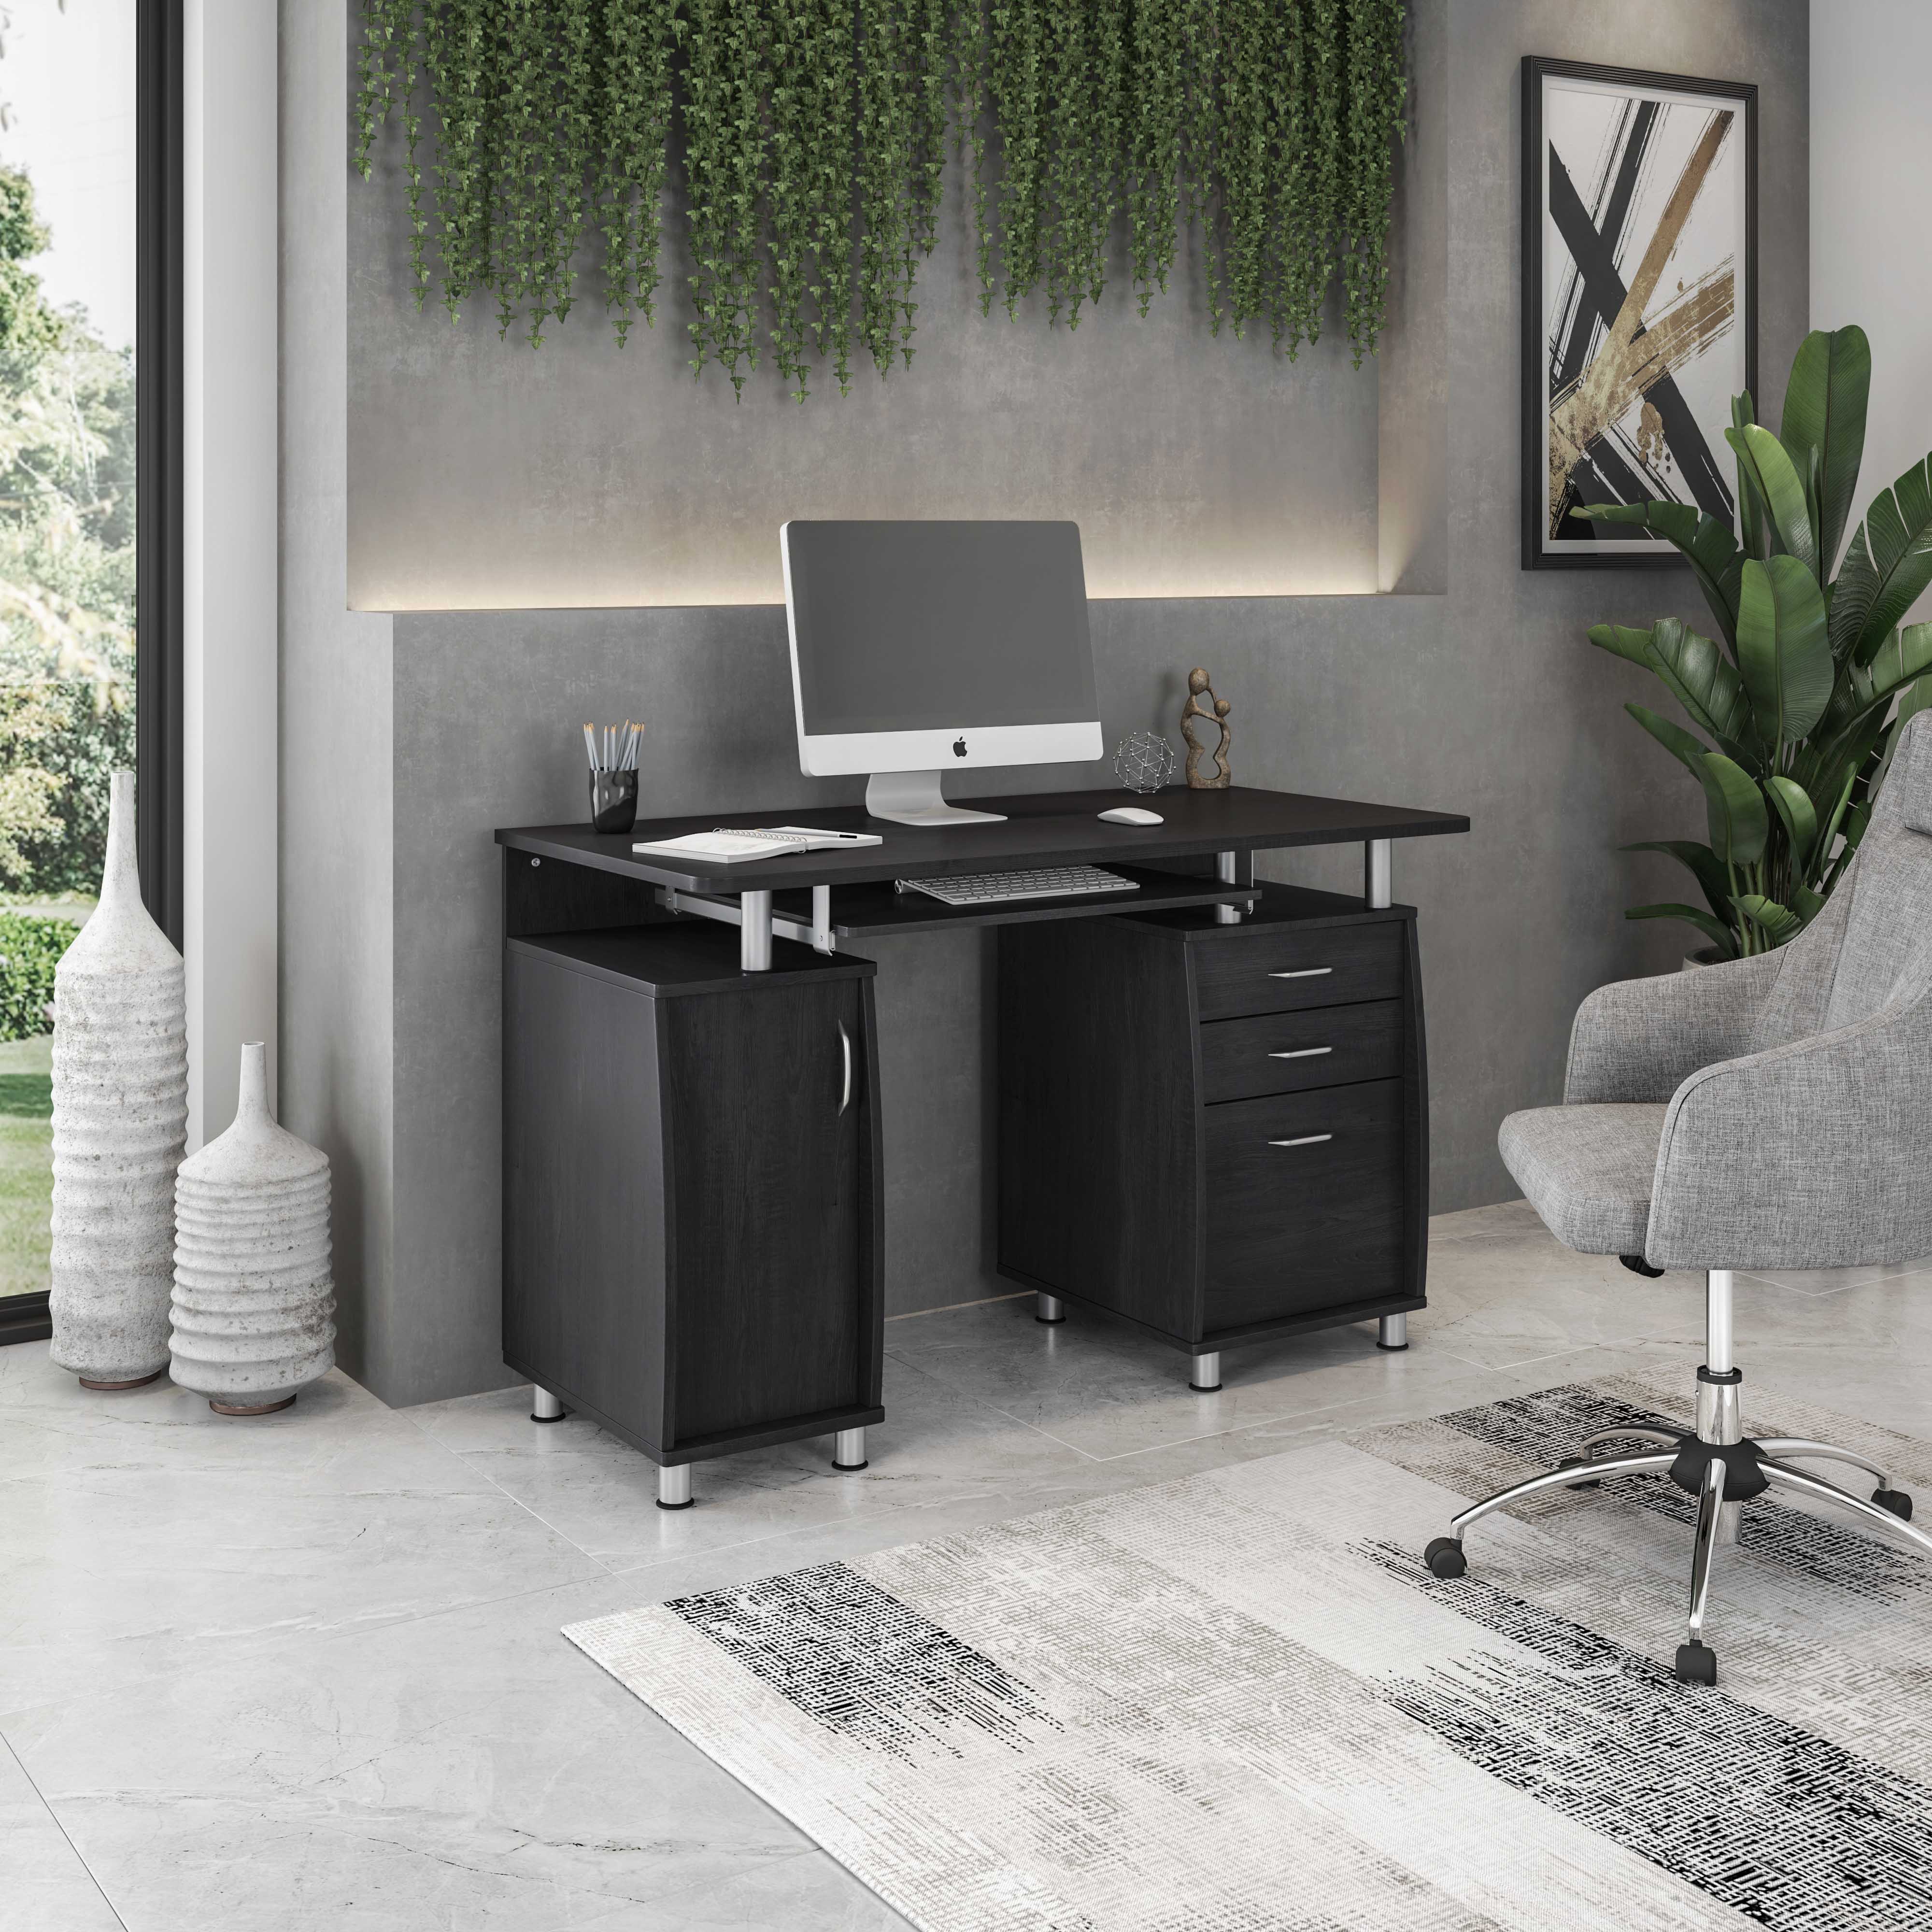 Techni Mobili Complete Adult Computer Workstation with Cabinet and Drawers, 30" H, Espresso - image 1 of 14